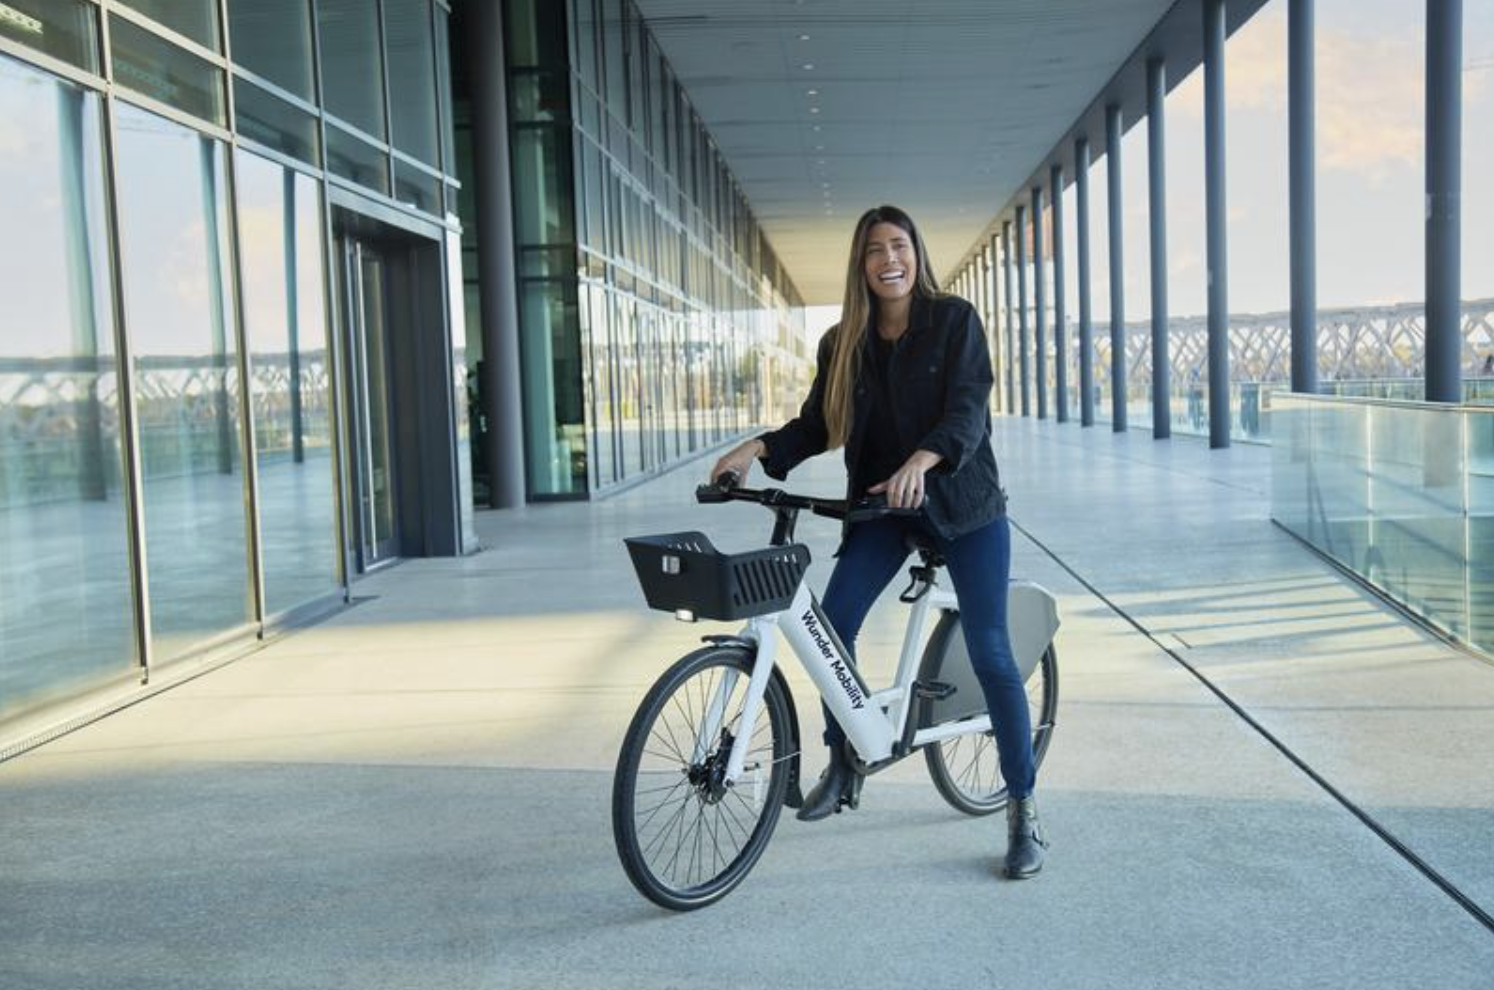 Caucasian female person smiling and riding an e-bike.